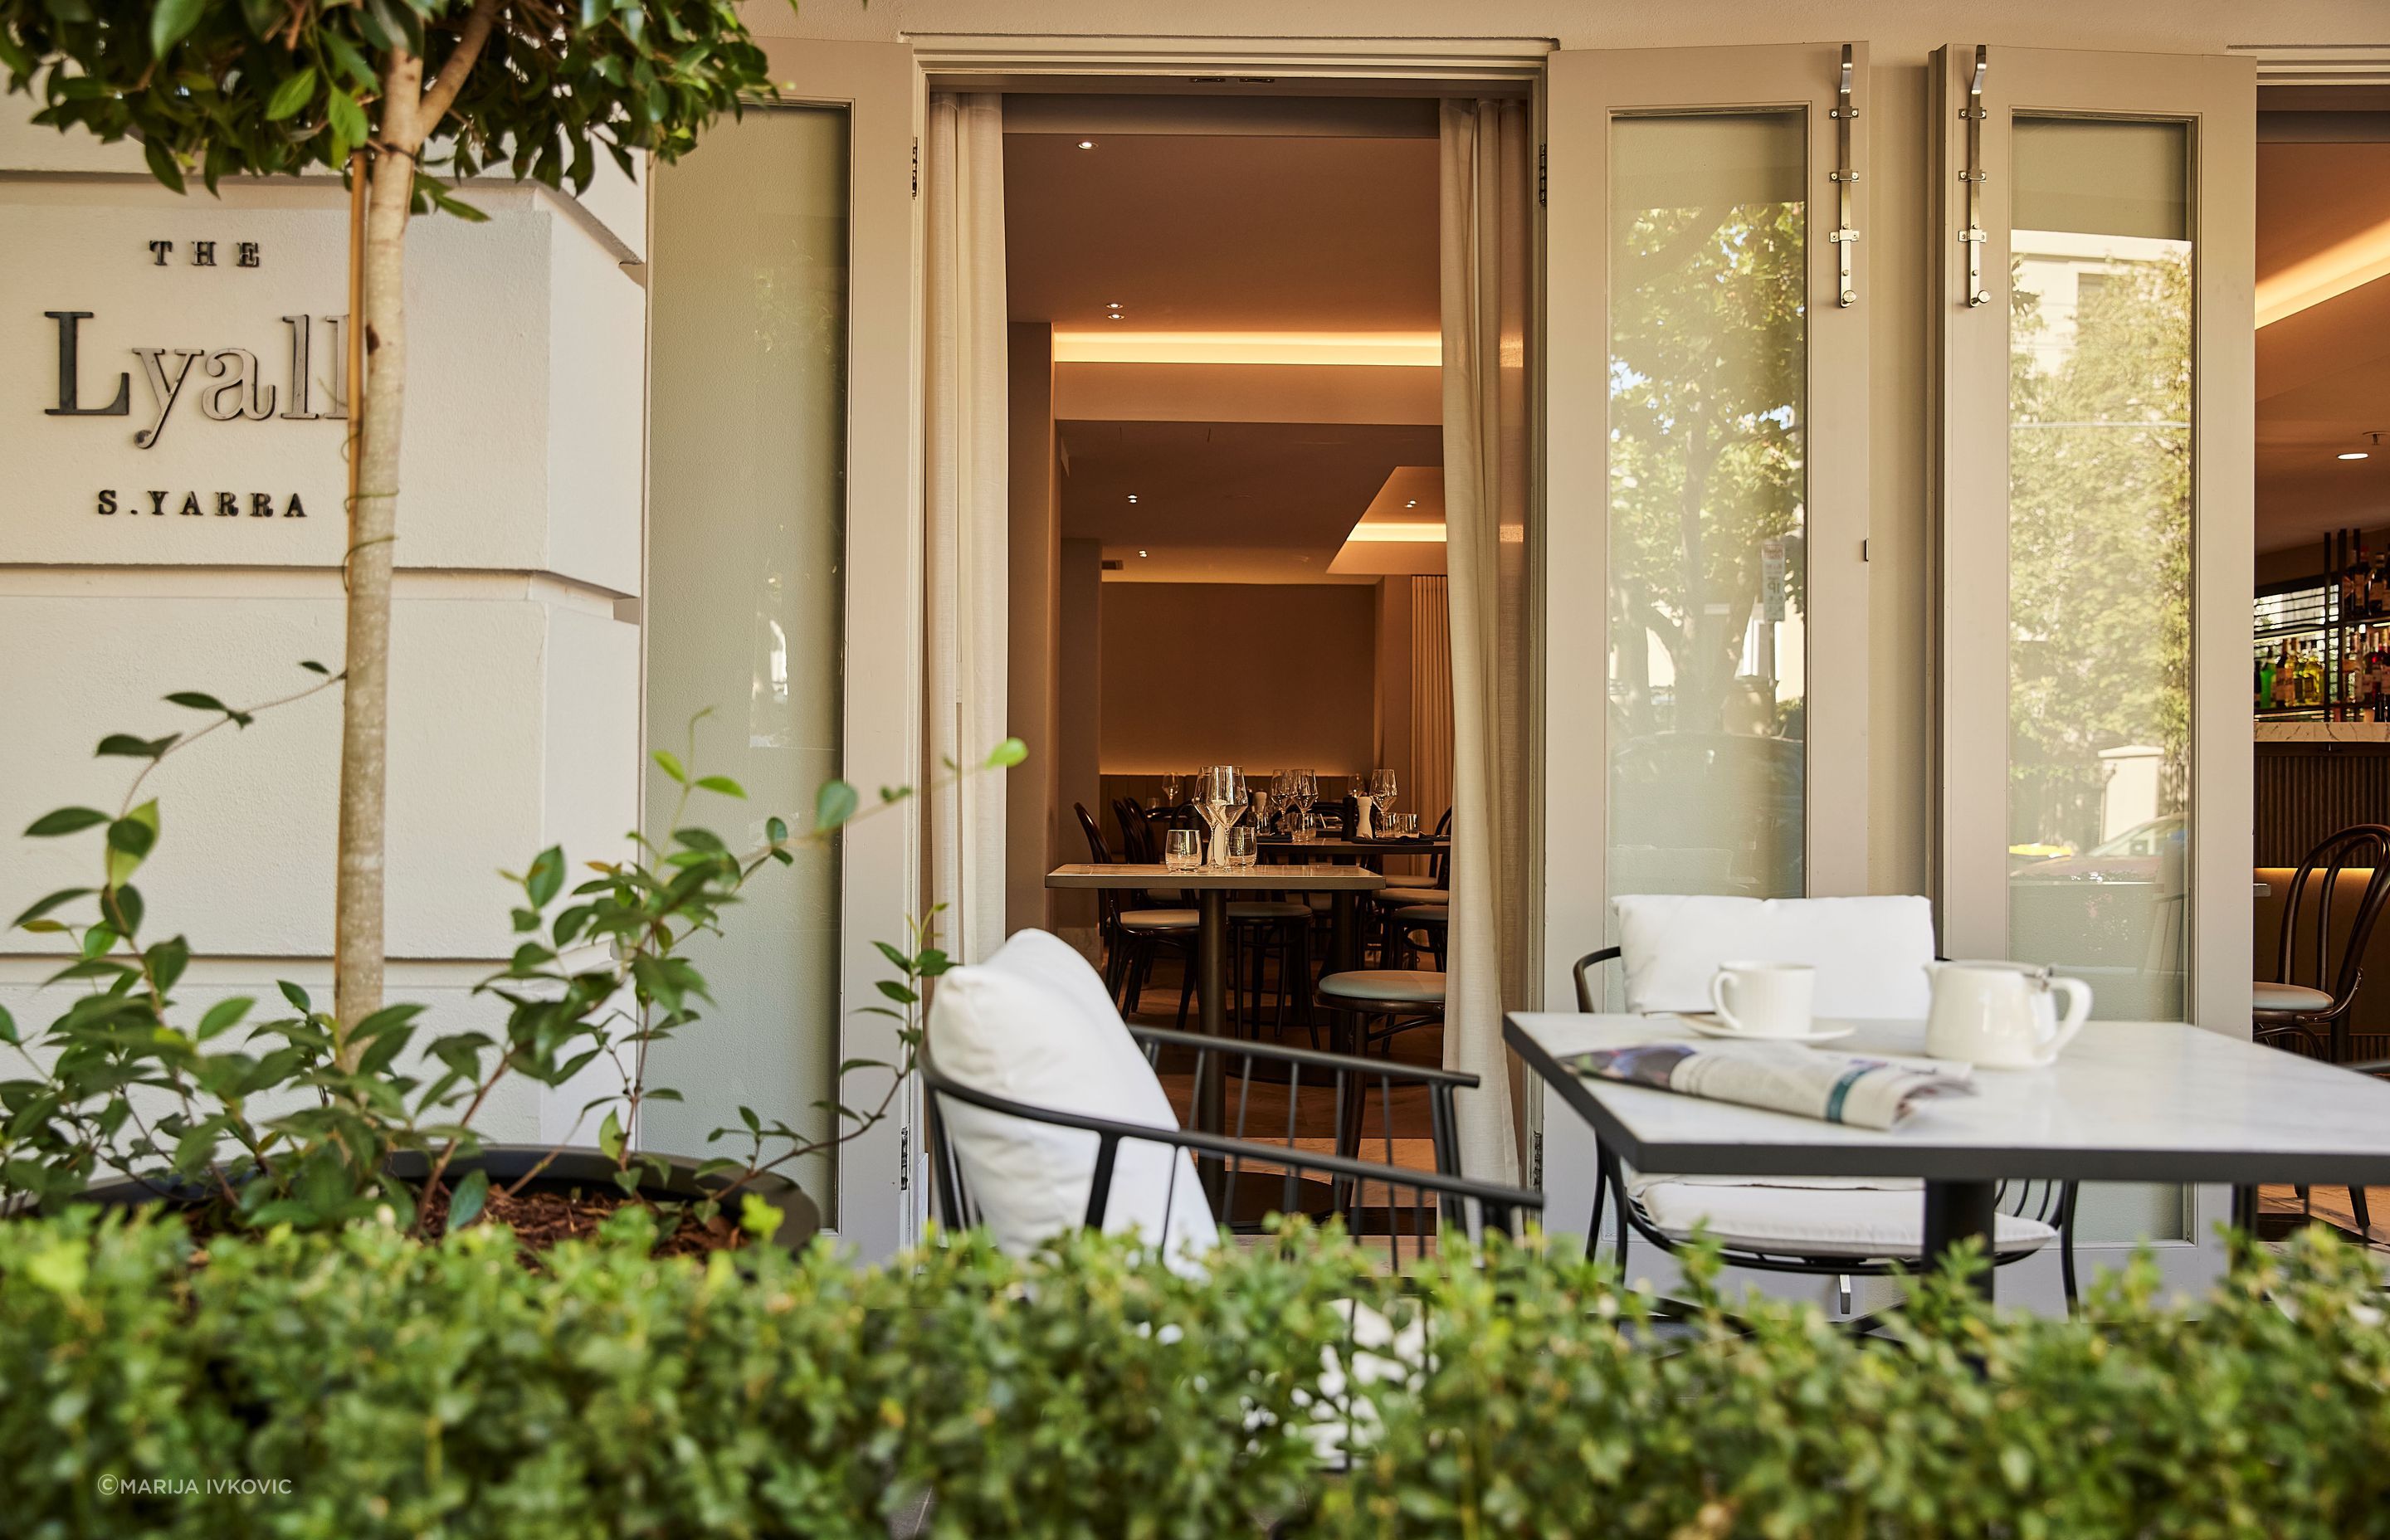 The entry to The Lyall passes by the al fresco dining area, leading guests into the soft lighting and serene colour palette that is the foundation of the luxurious yet cosy feeling throughout the hotel.